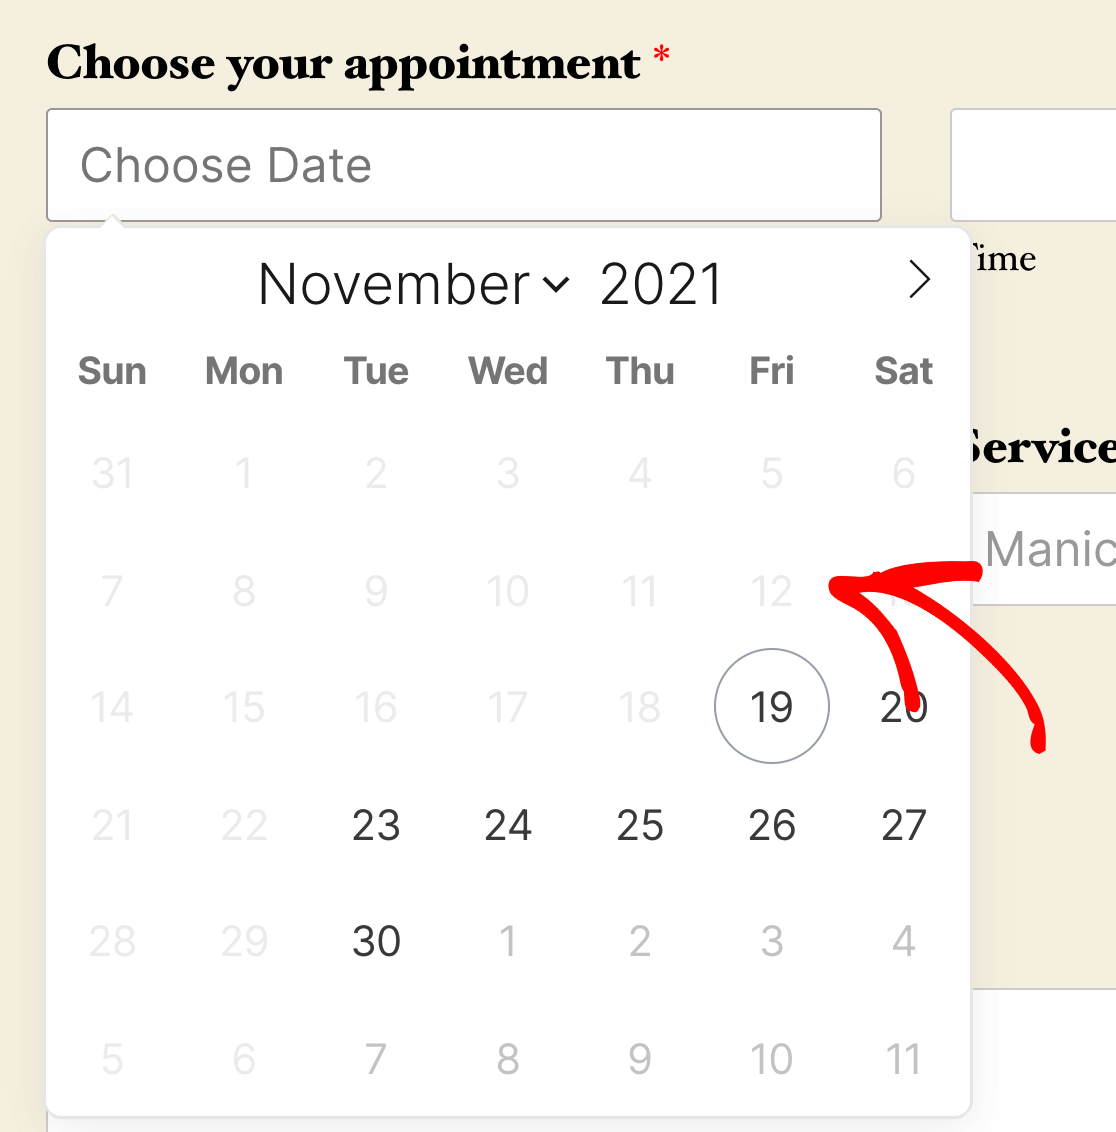 Disabled dates in the date picker